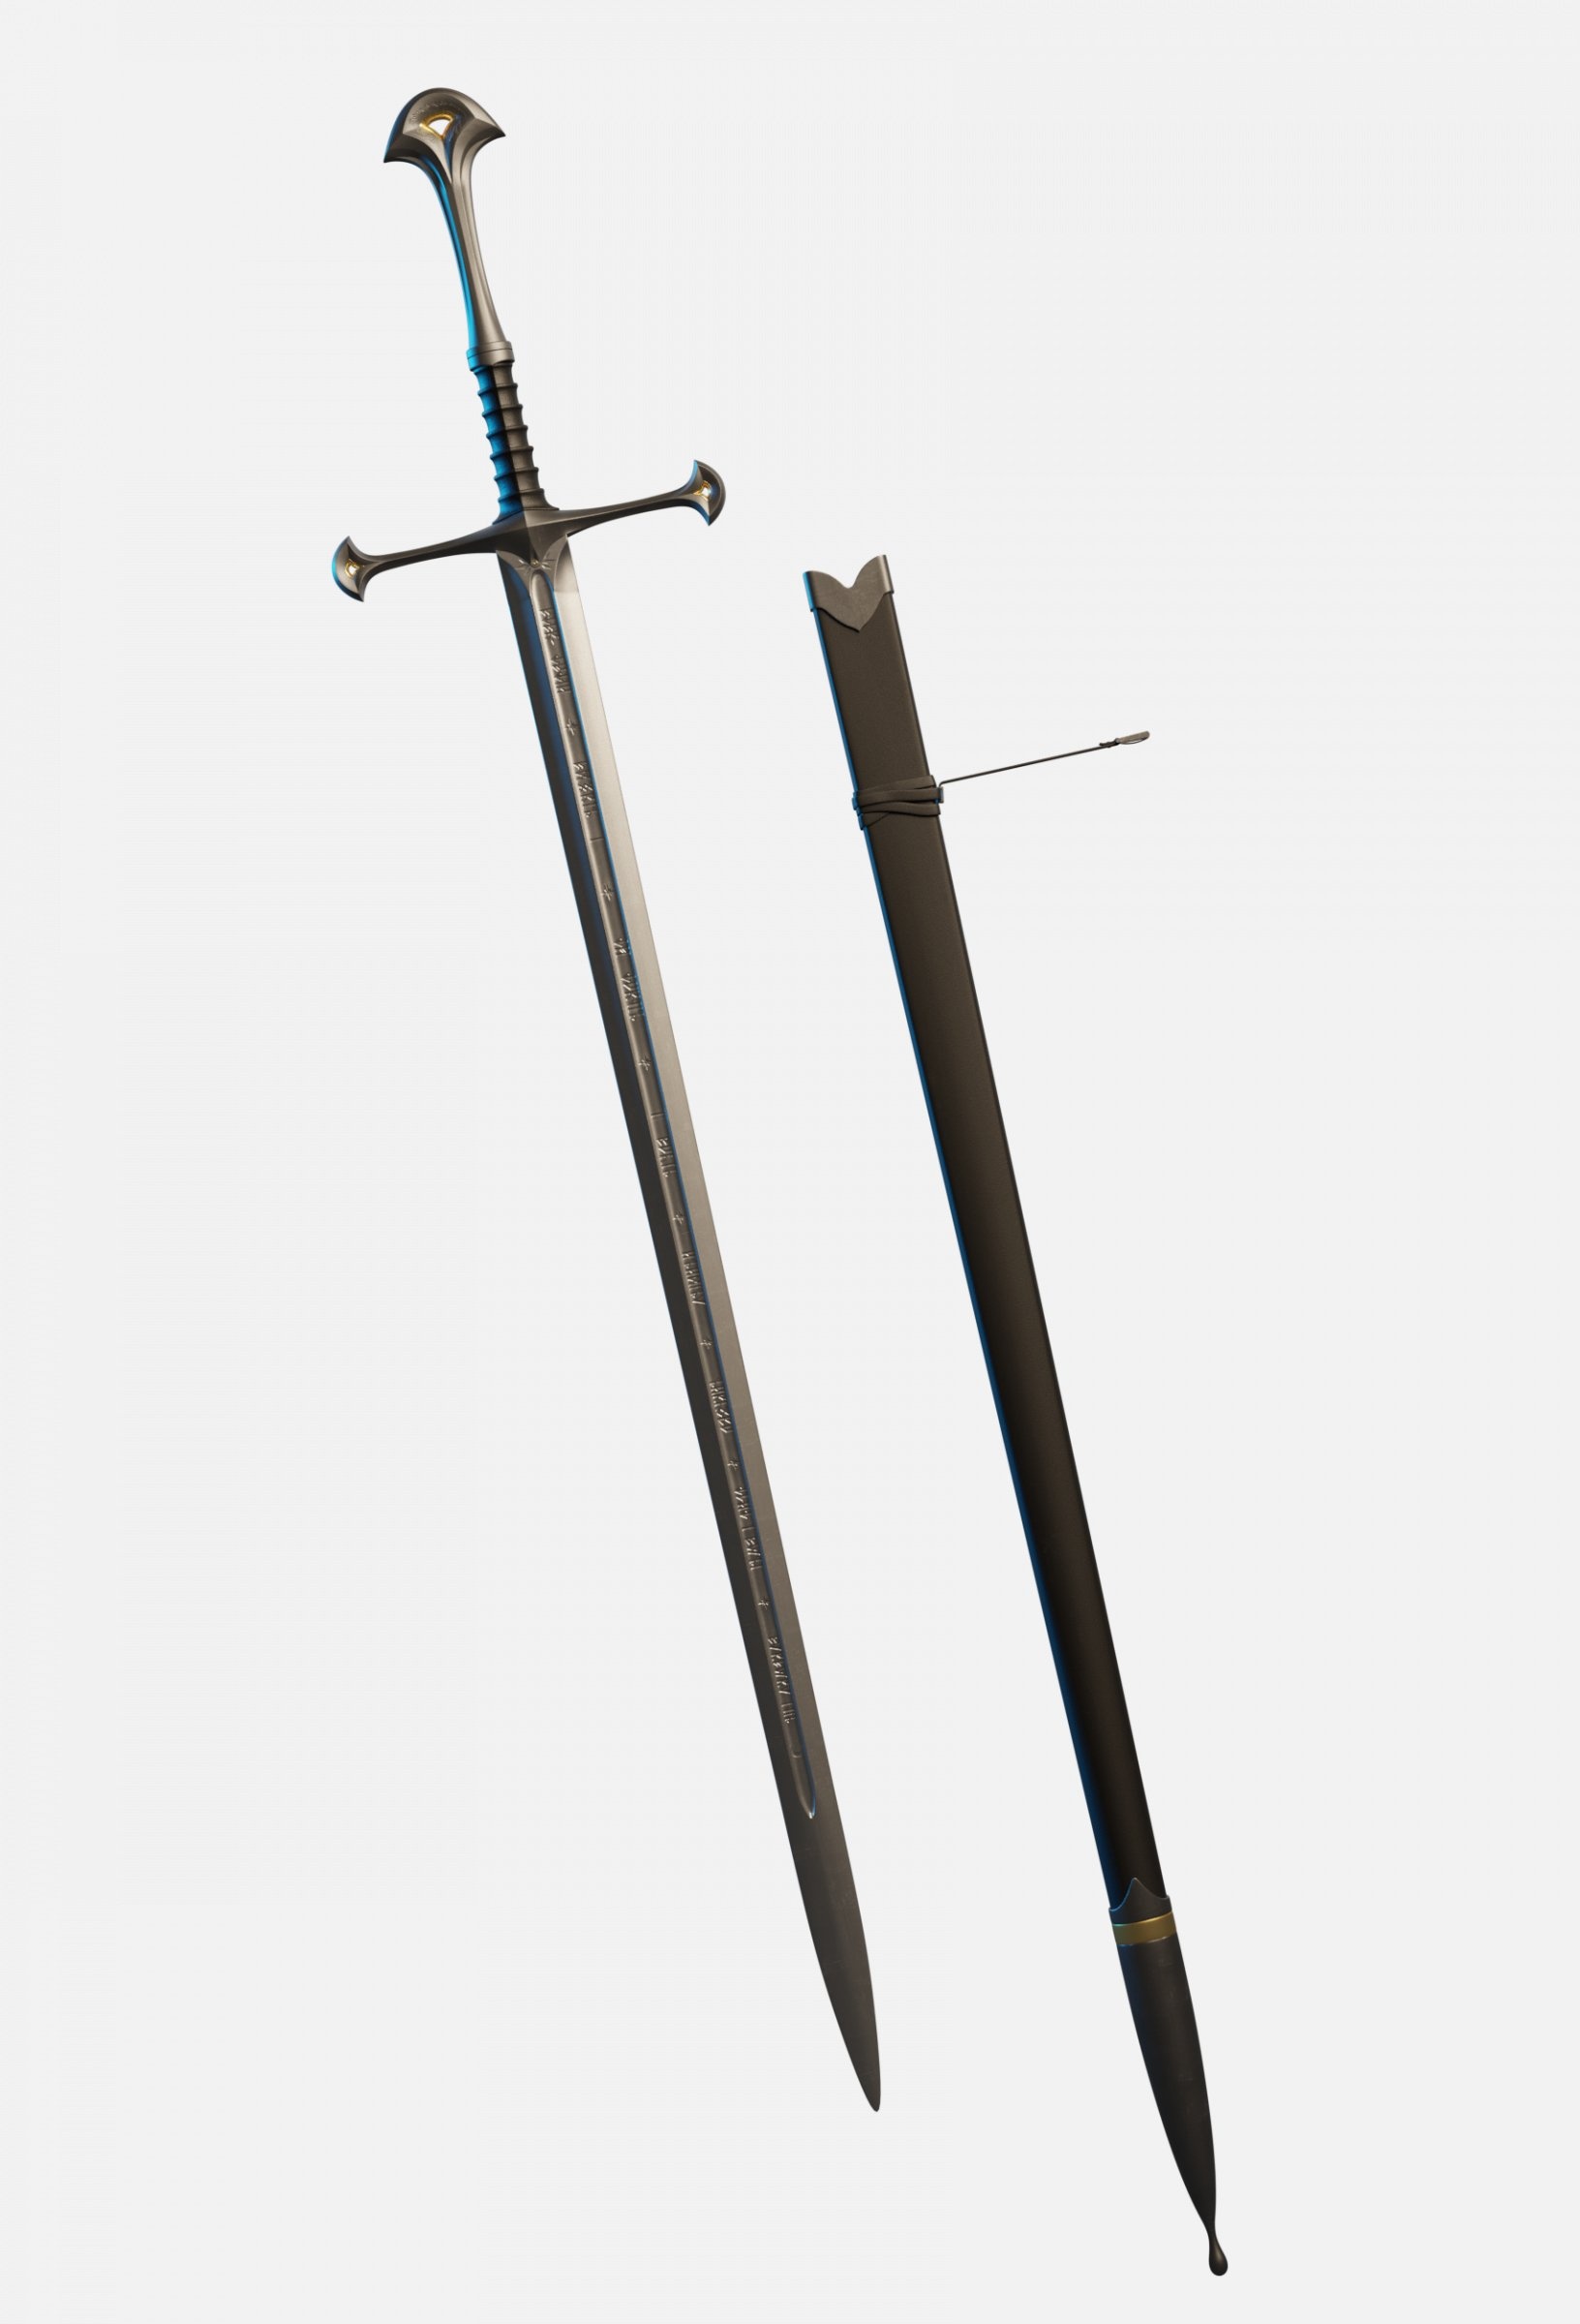 Anduril Sword, Flame of the West, ImperialSnowEagle's creation, 3D model, 1640x2400 HD Phone